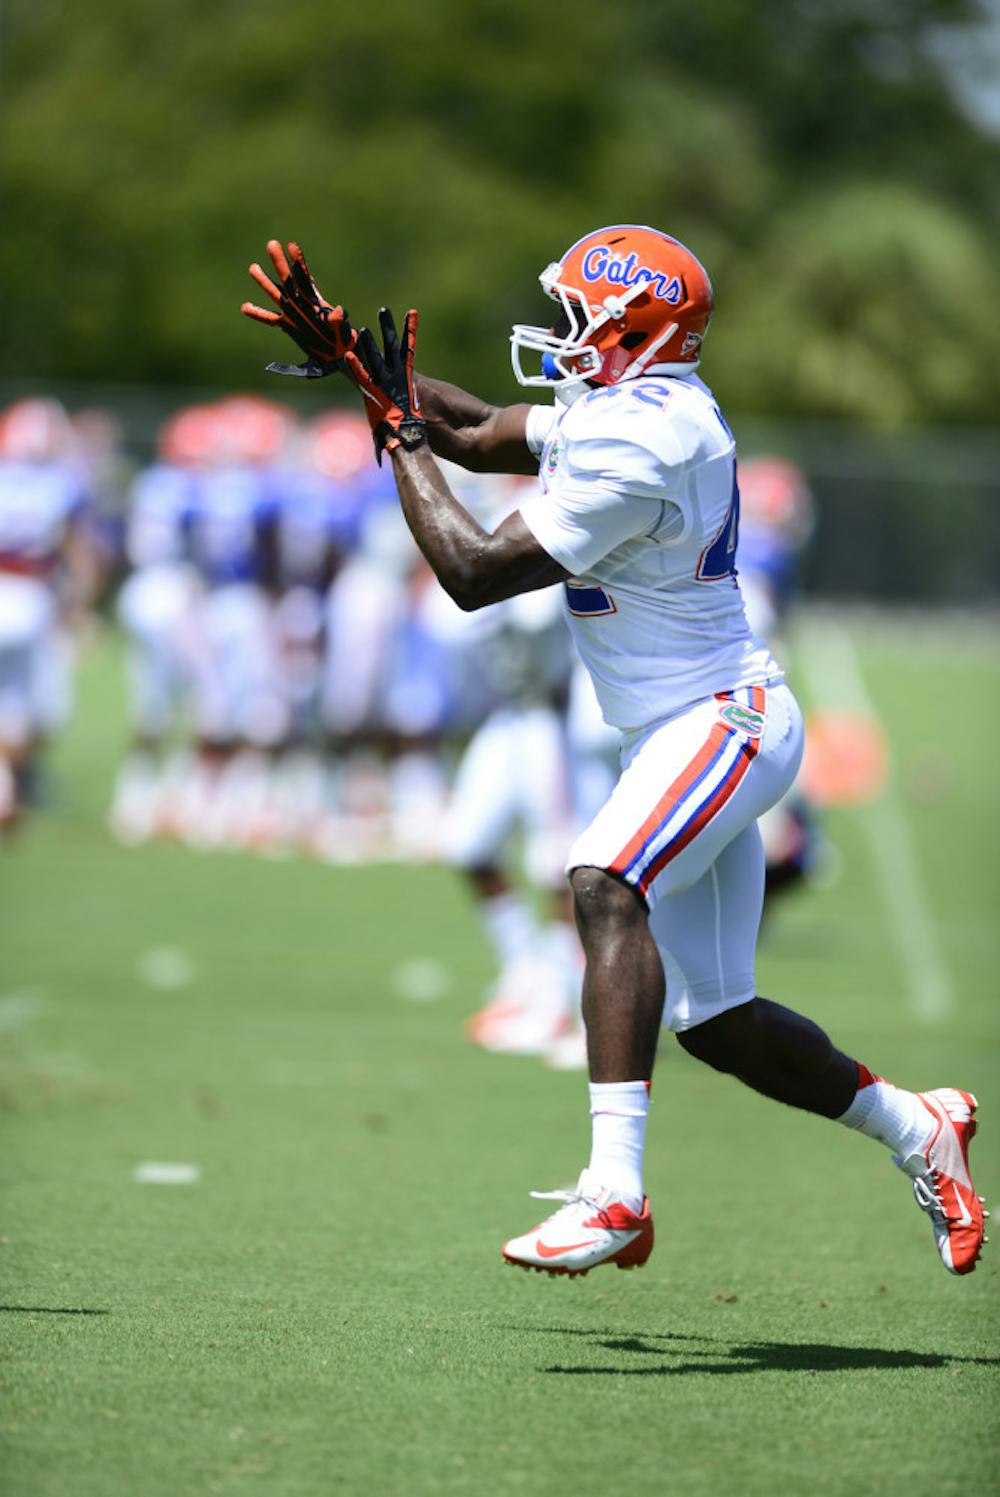 <p align="justify">Freshman Keanu Neal reaches for a pass during practice last Monday. Neal was rated the No. 7 safety in the 2013 recruiting class, according to Rivals.com.</p>